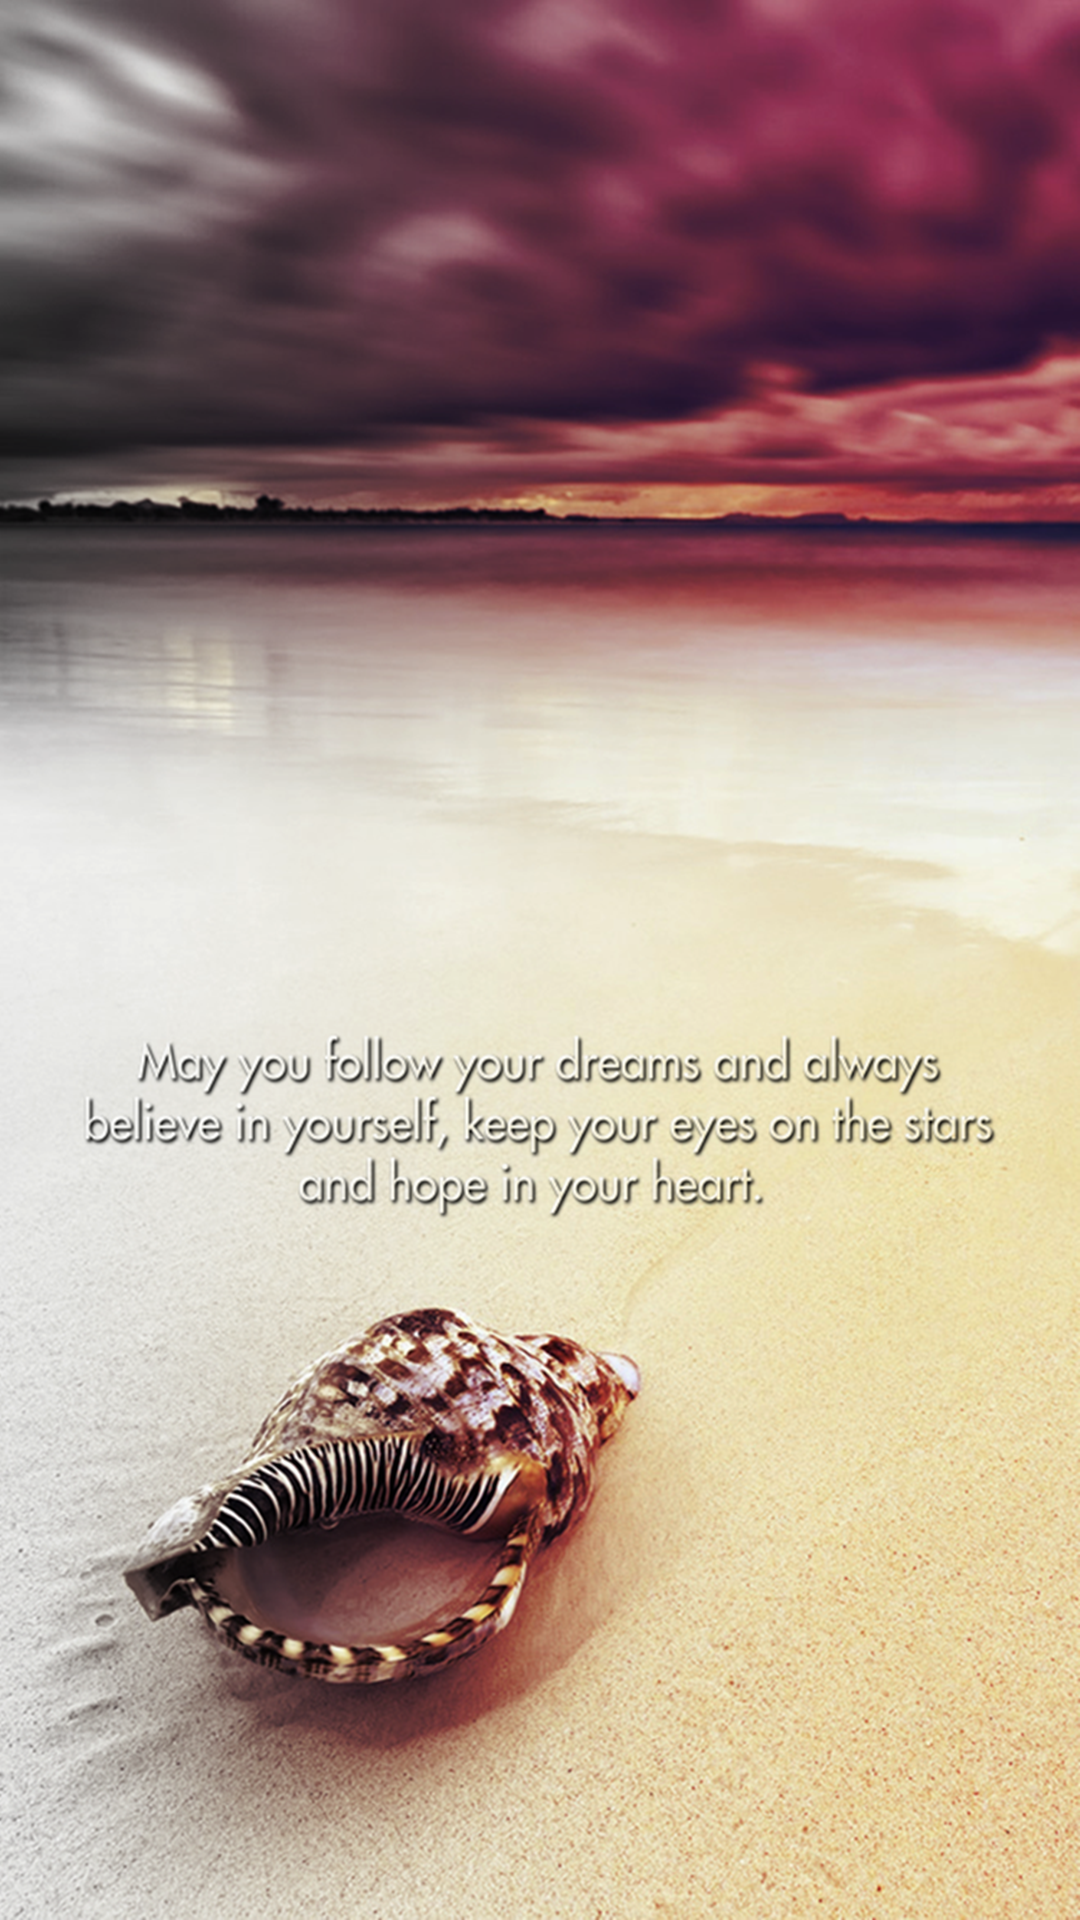 Follow Your Dreams. Galaxy wallpaper quotes, Dreaming of you, Dream